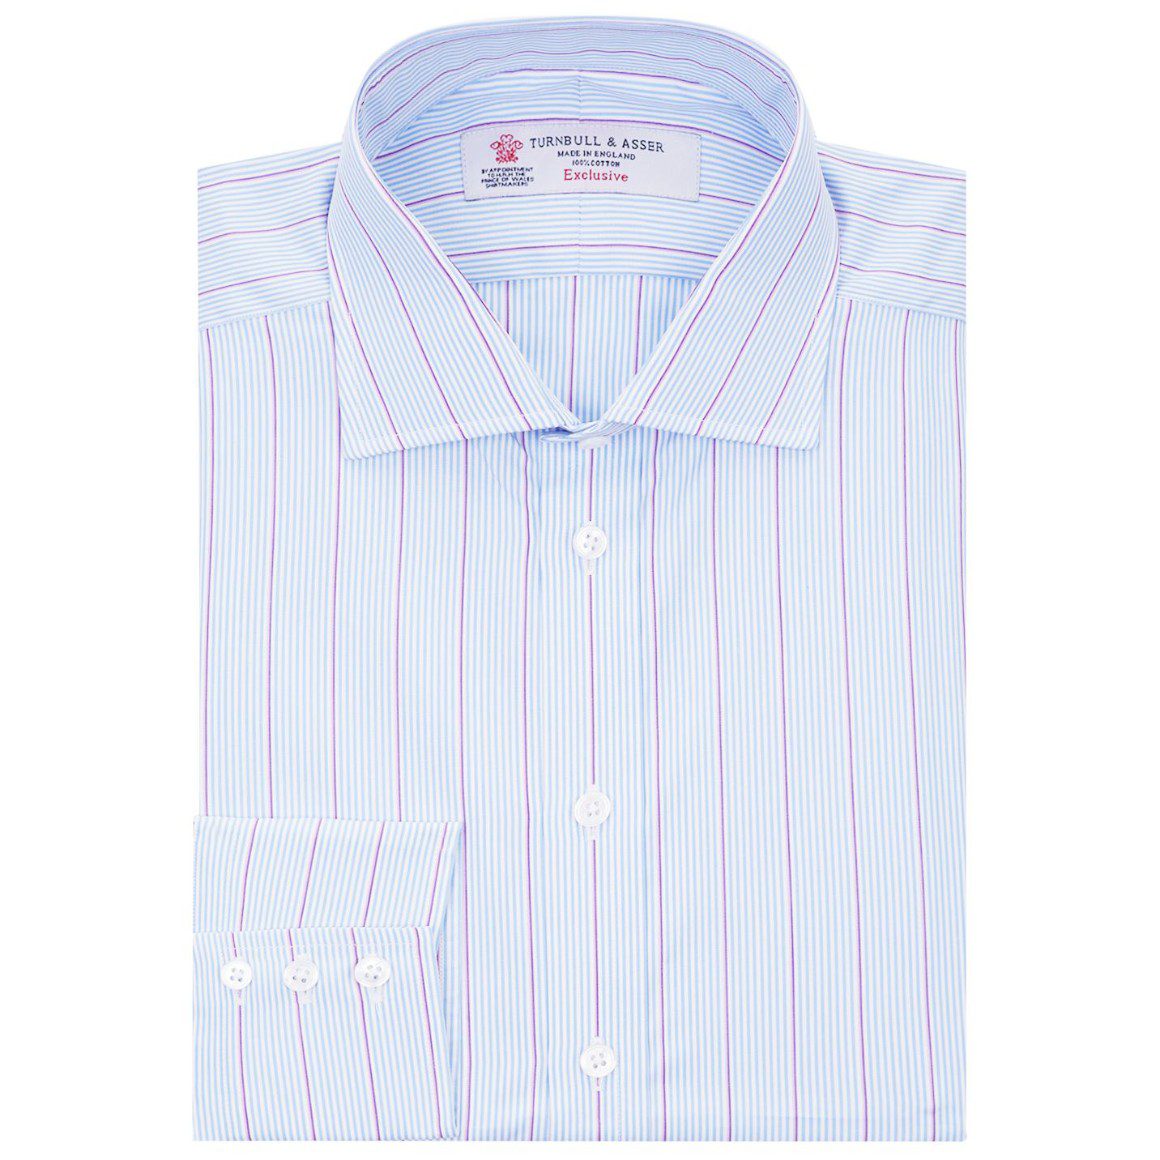 The Best Vertical Stripe Shirts For Men ...